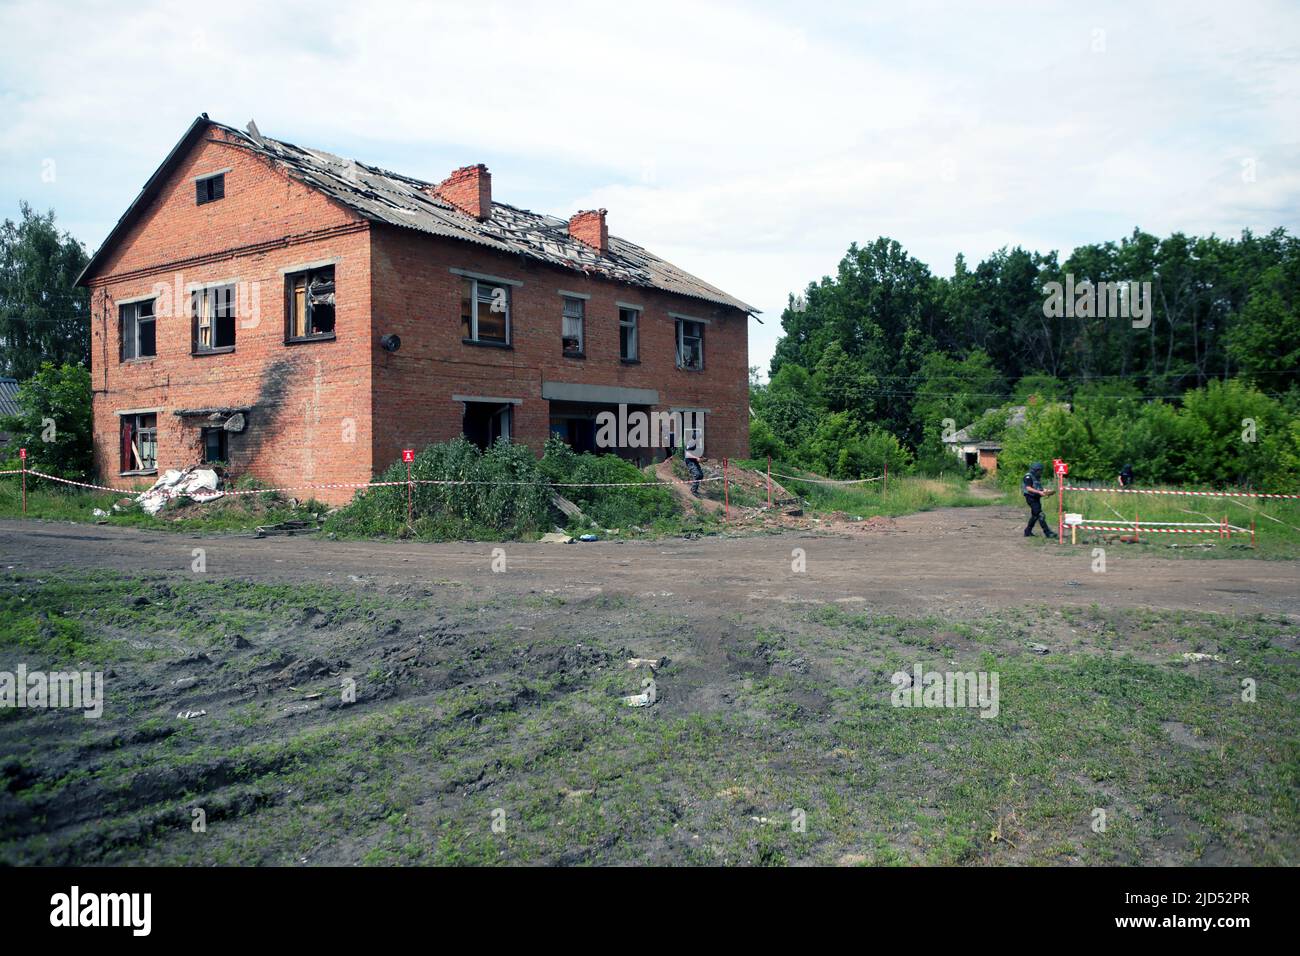 TROSTIANETS, UKRAINE - JUNE 17, 2022 - A brick plant where lots of ammunition and other explosive items remain after the Russian occupation is picture Stock Photo